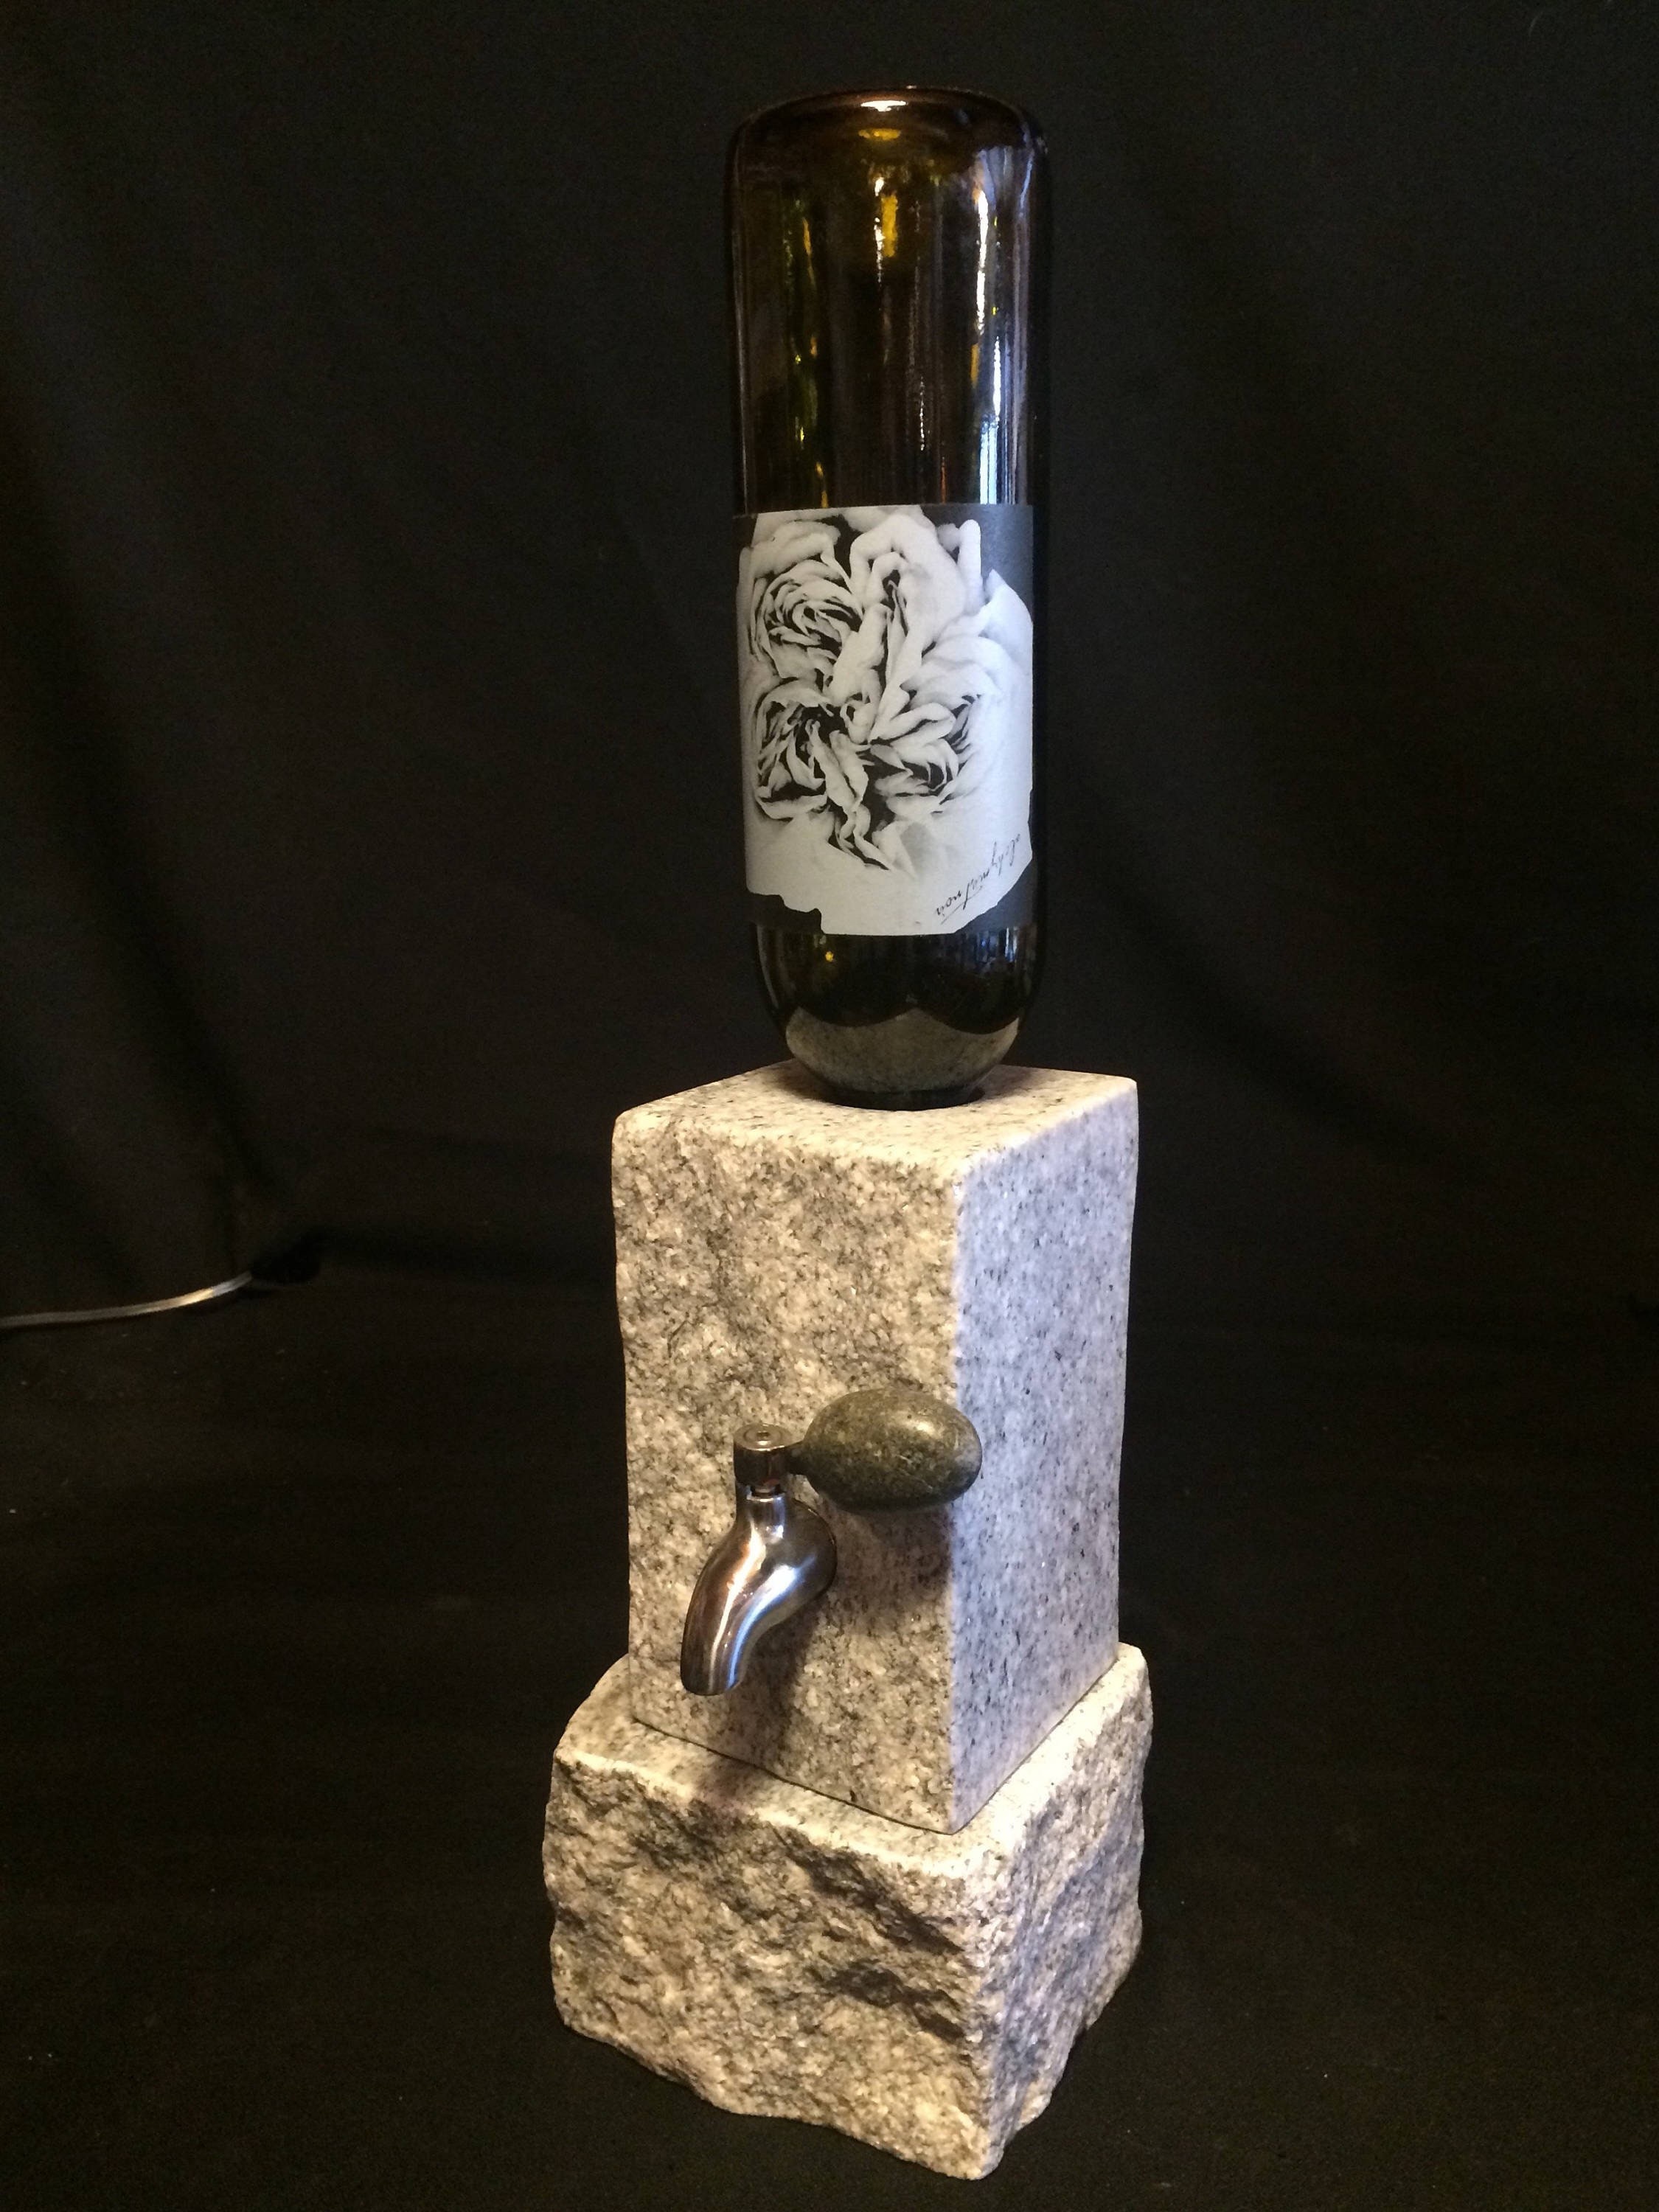 New Tall Stand - Funky Rock Designs